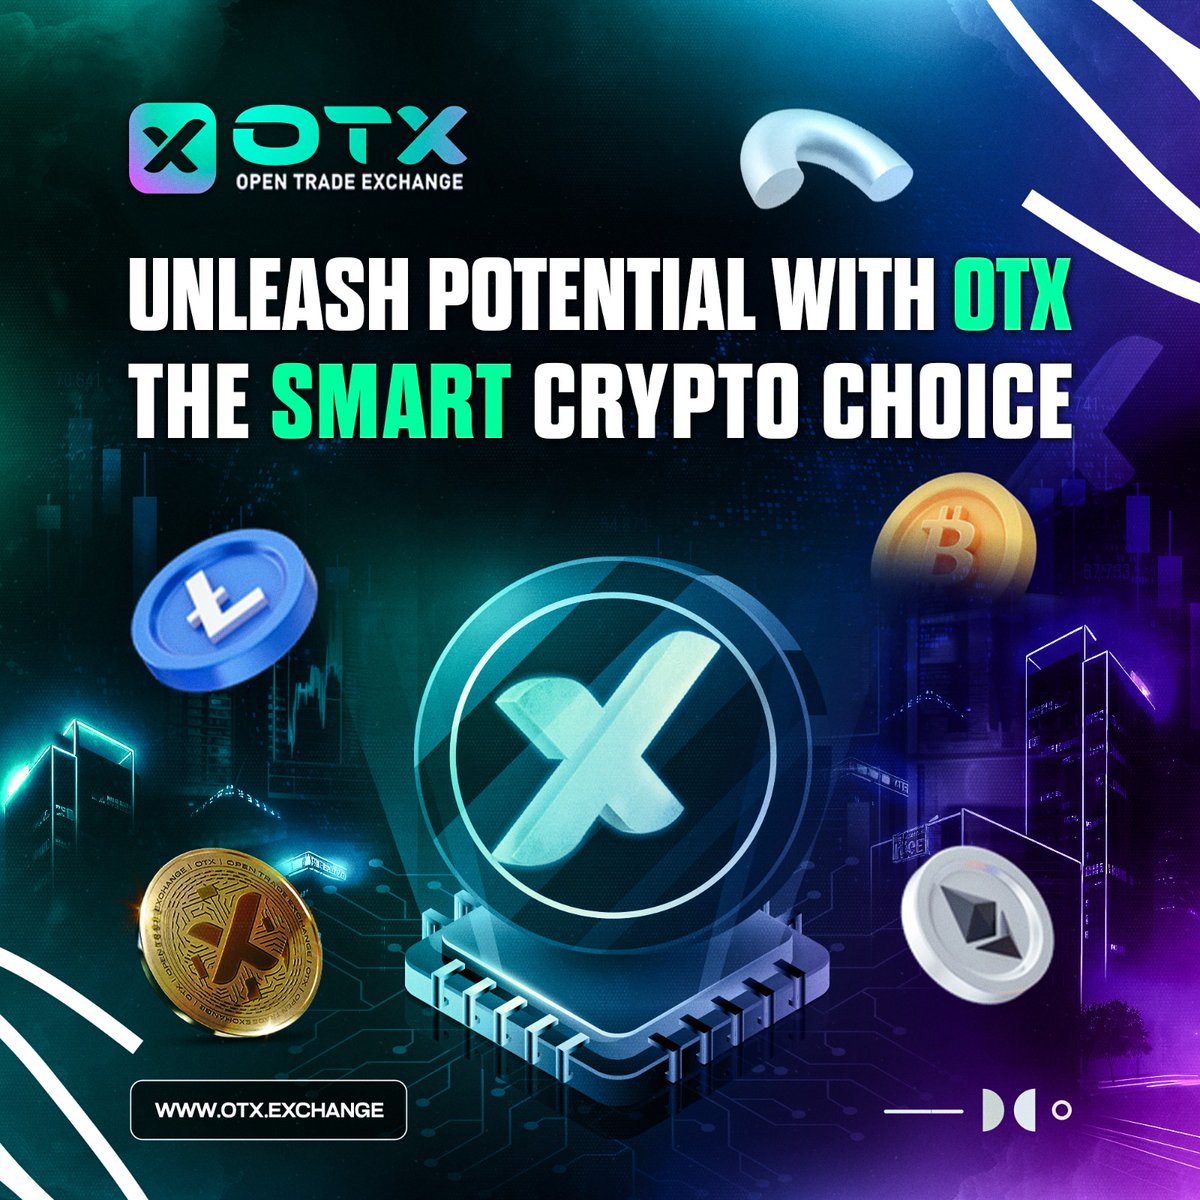 Dive into the digital age with #OTX! 

Unlock the universe of #Crypto with the smart choice that propels you ahead.

Join the #OTXExchange movement! 

#CryptoFuture #BeTheChange